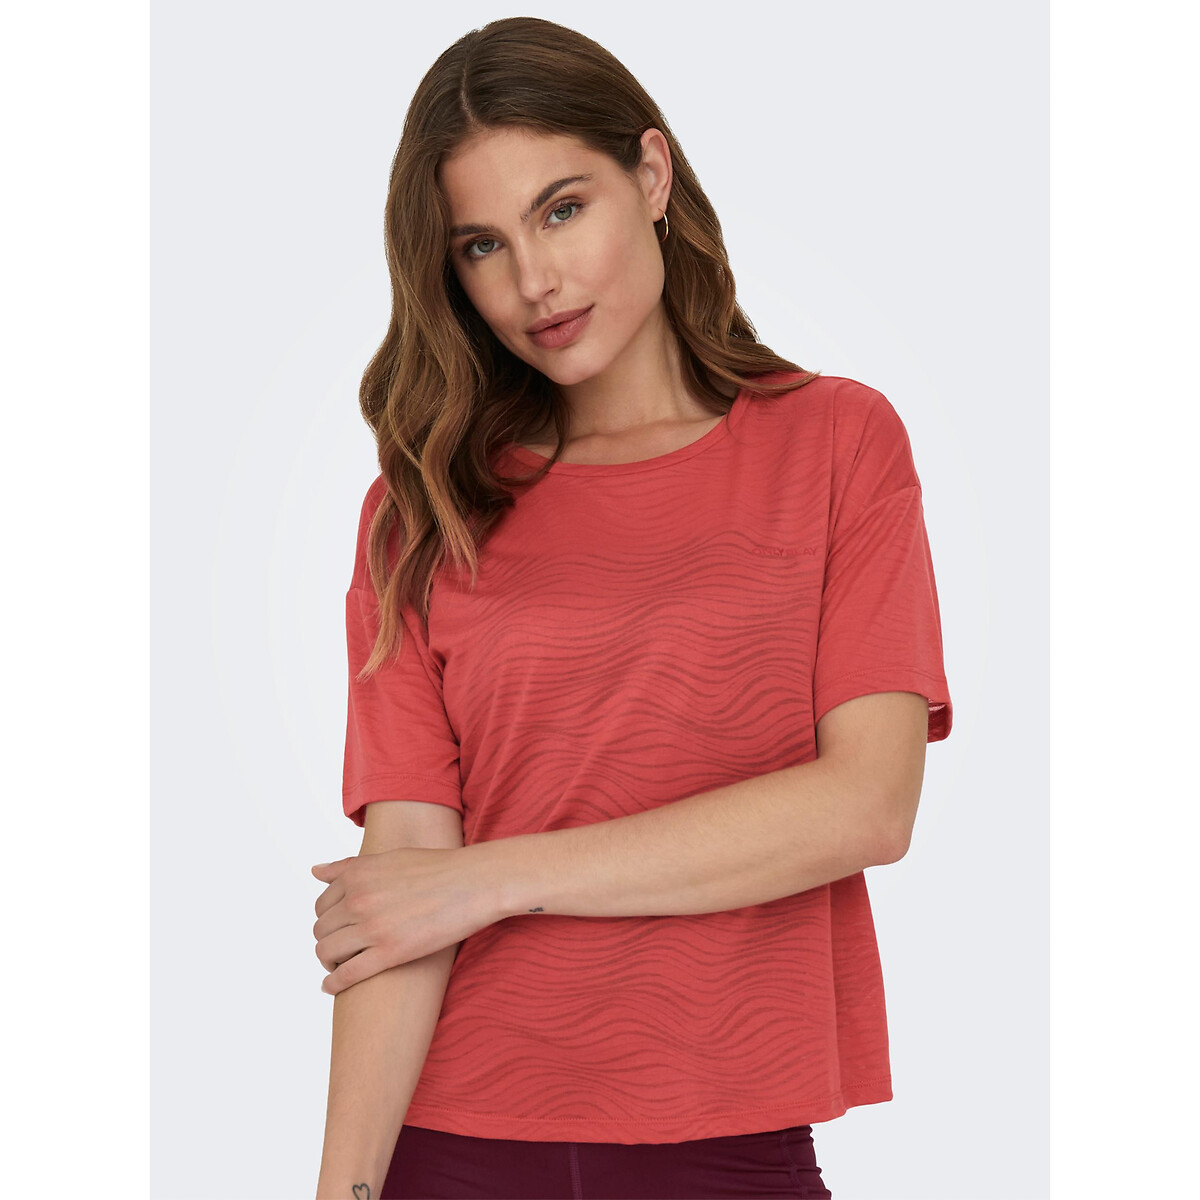 Nia burnout t-shirt in relaxed fit Only Play